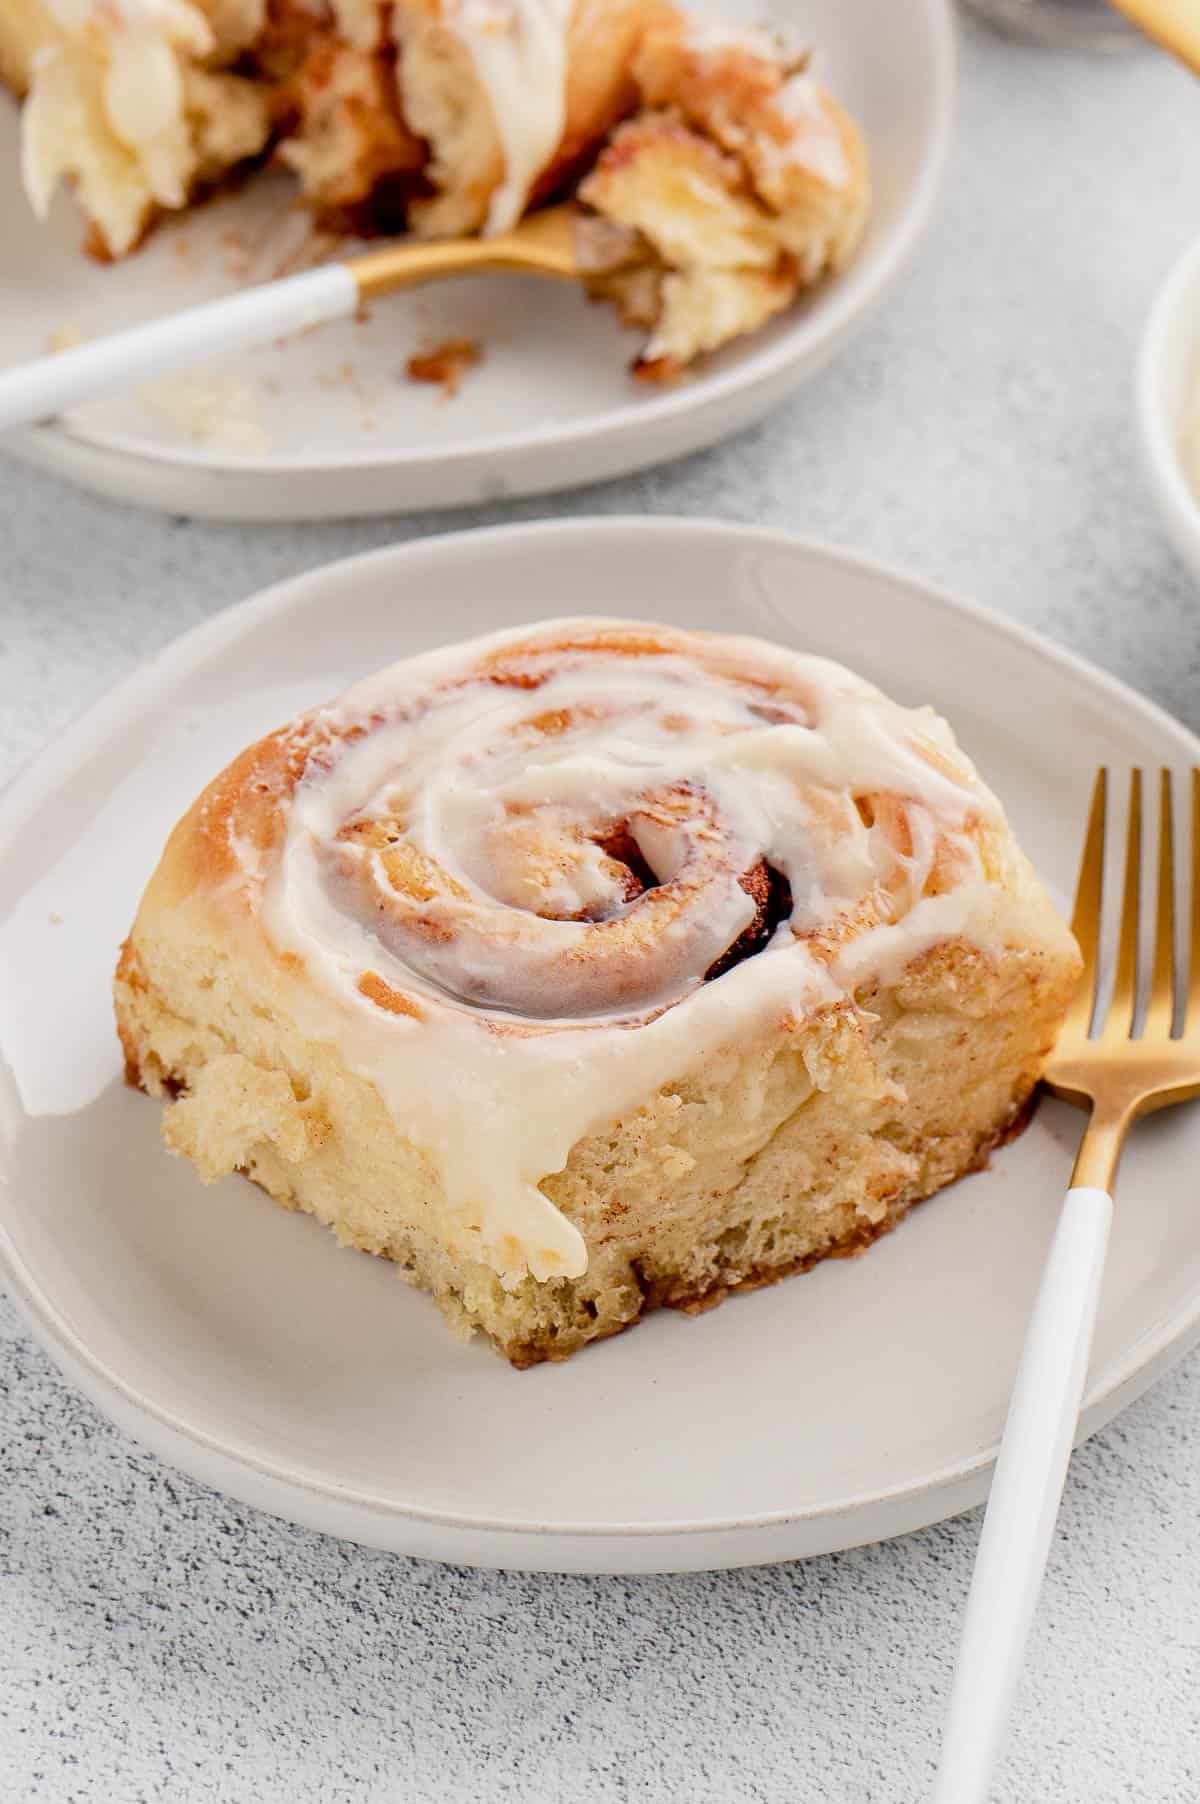 A frosted overnight cinnamon roll on a white plate next to a fork.